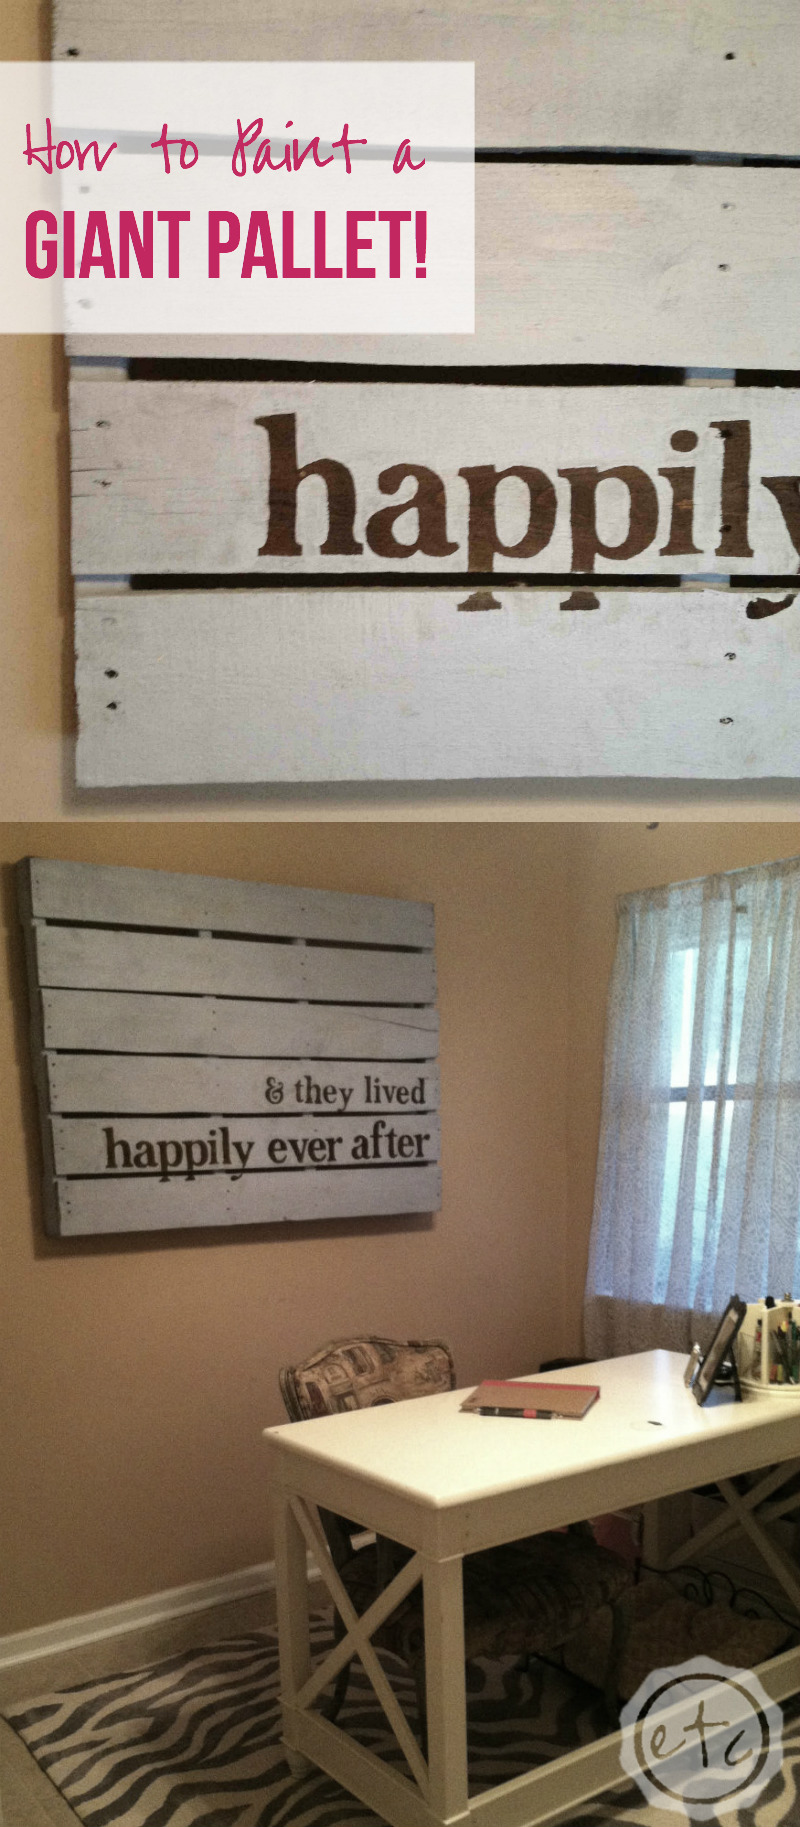 How to Paint a Giant Pallet with Happily Ever After, Etc